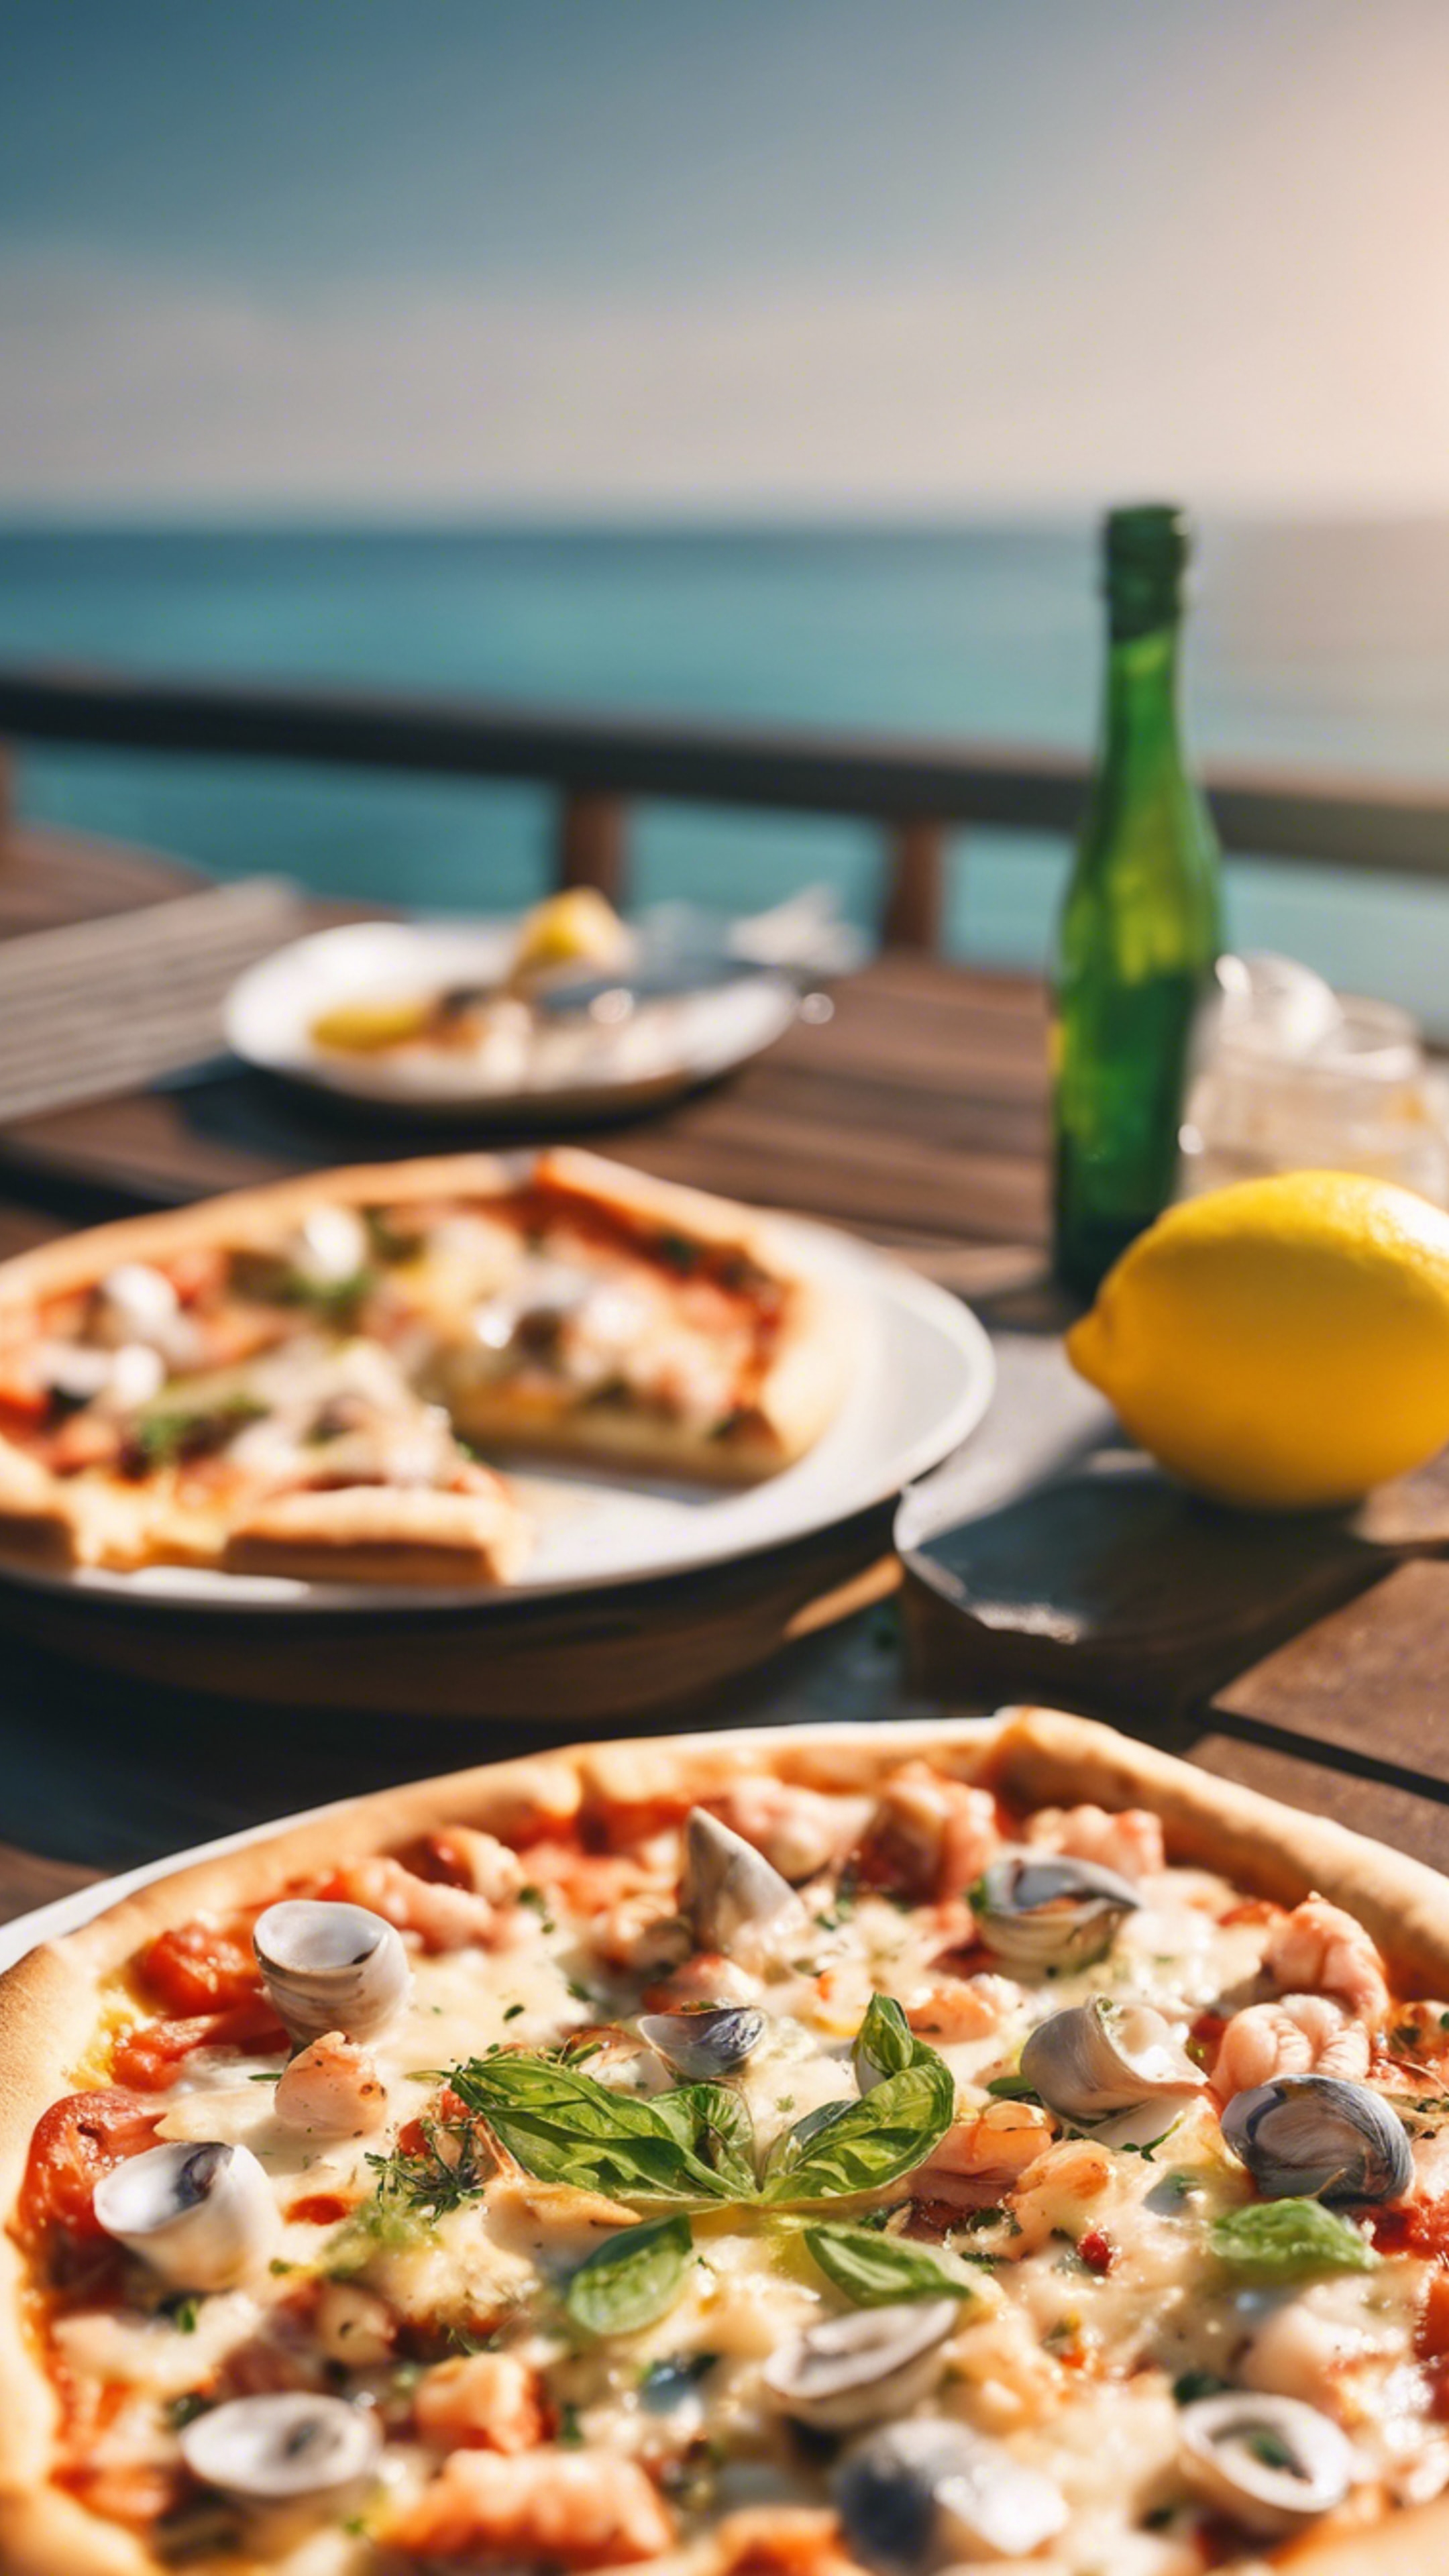 A zesty lemon and seafood pizza on a sunny seaside cafe table. Ფონი[3a16046c2c4041a9a353]